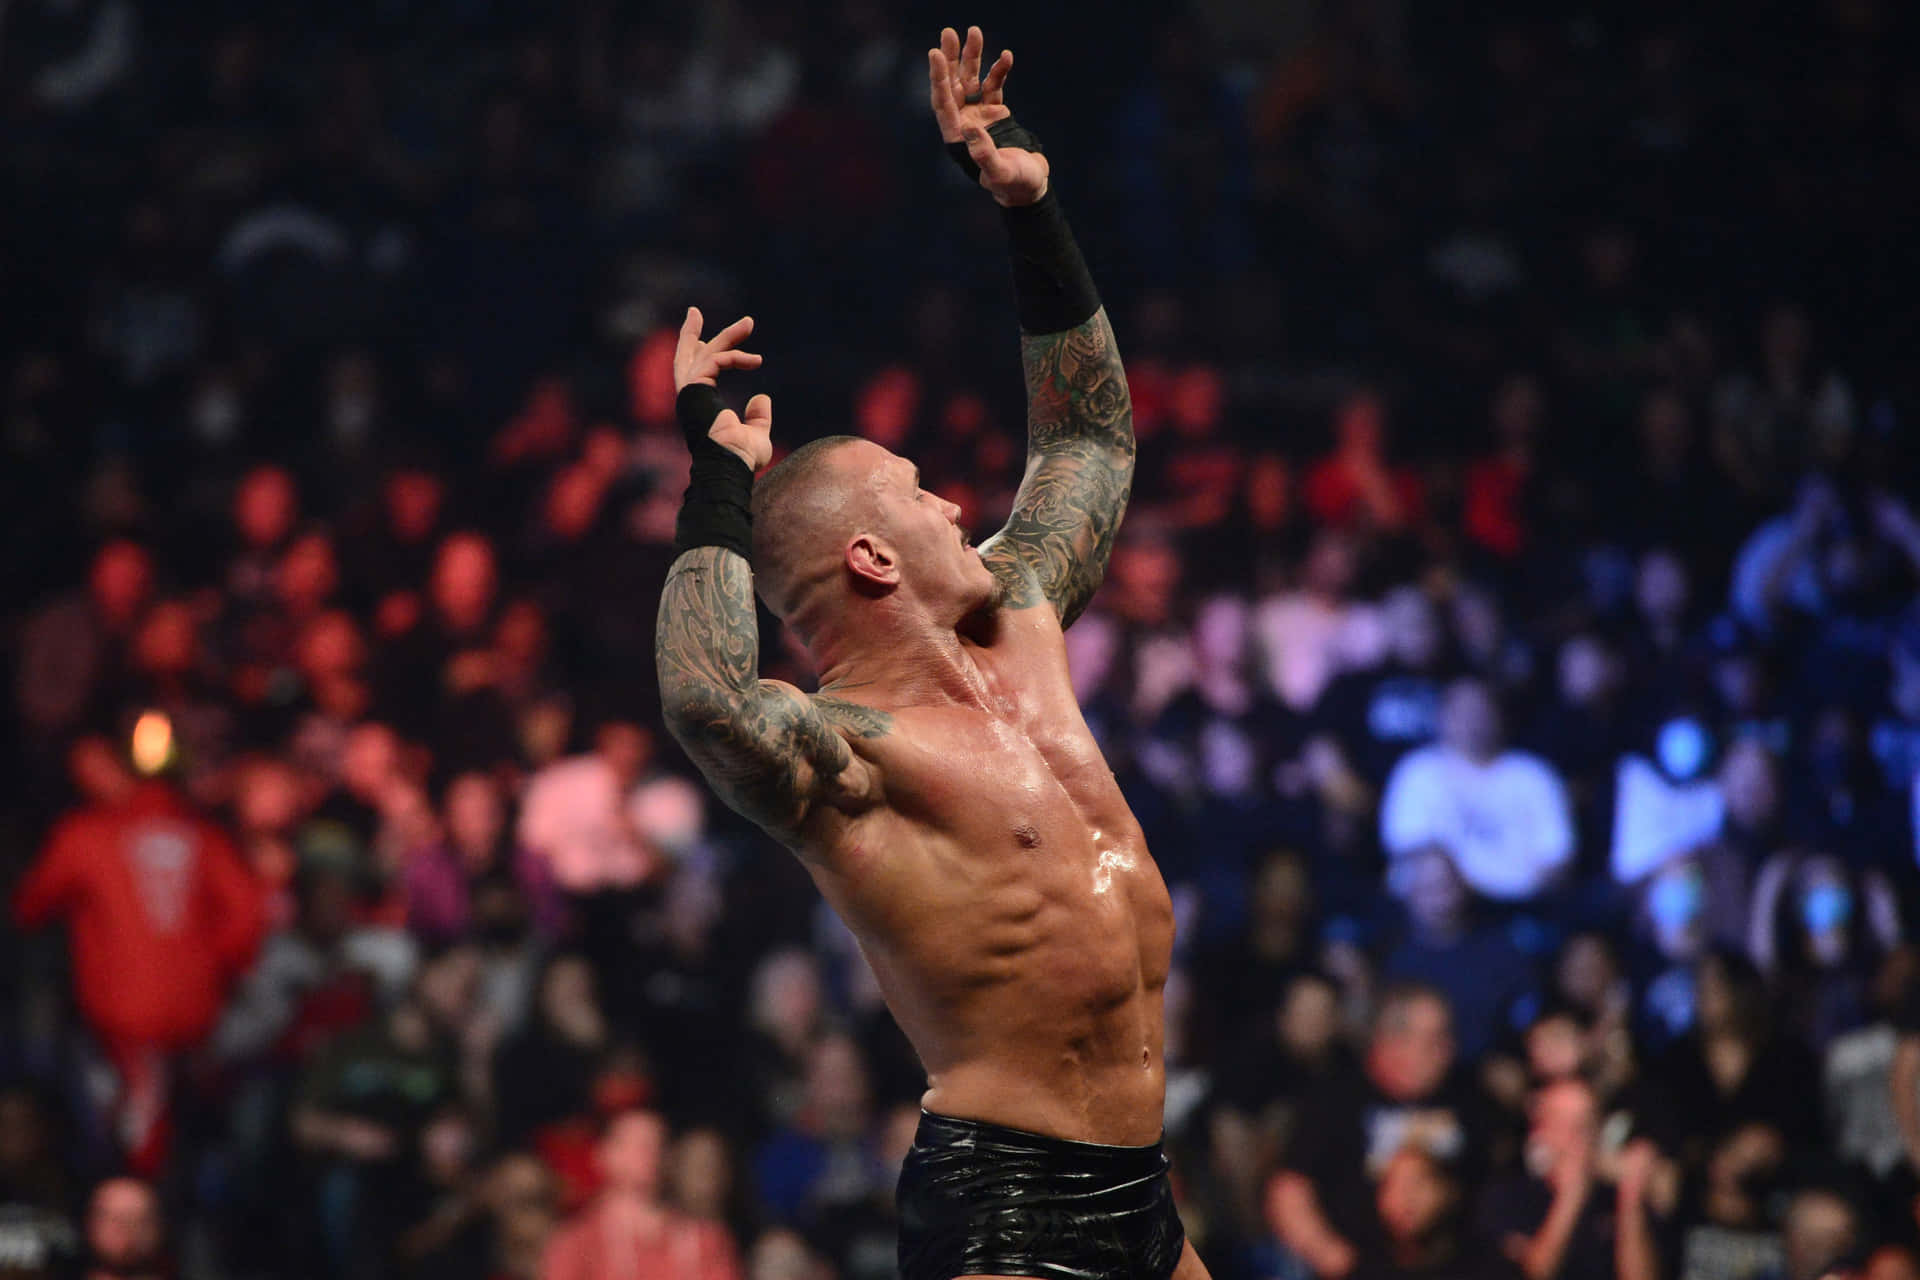 A Wrestler With Tattoos Is Holding His Arms Up In The Air